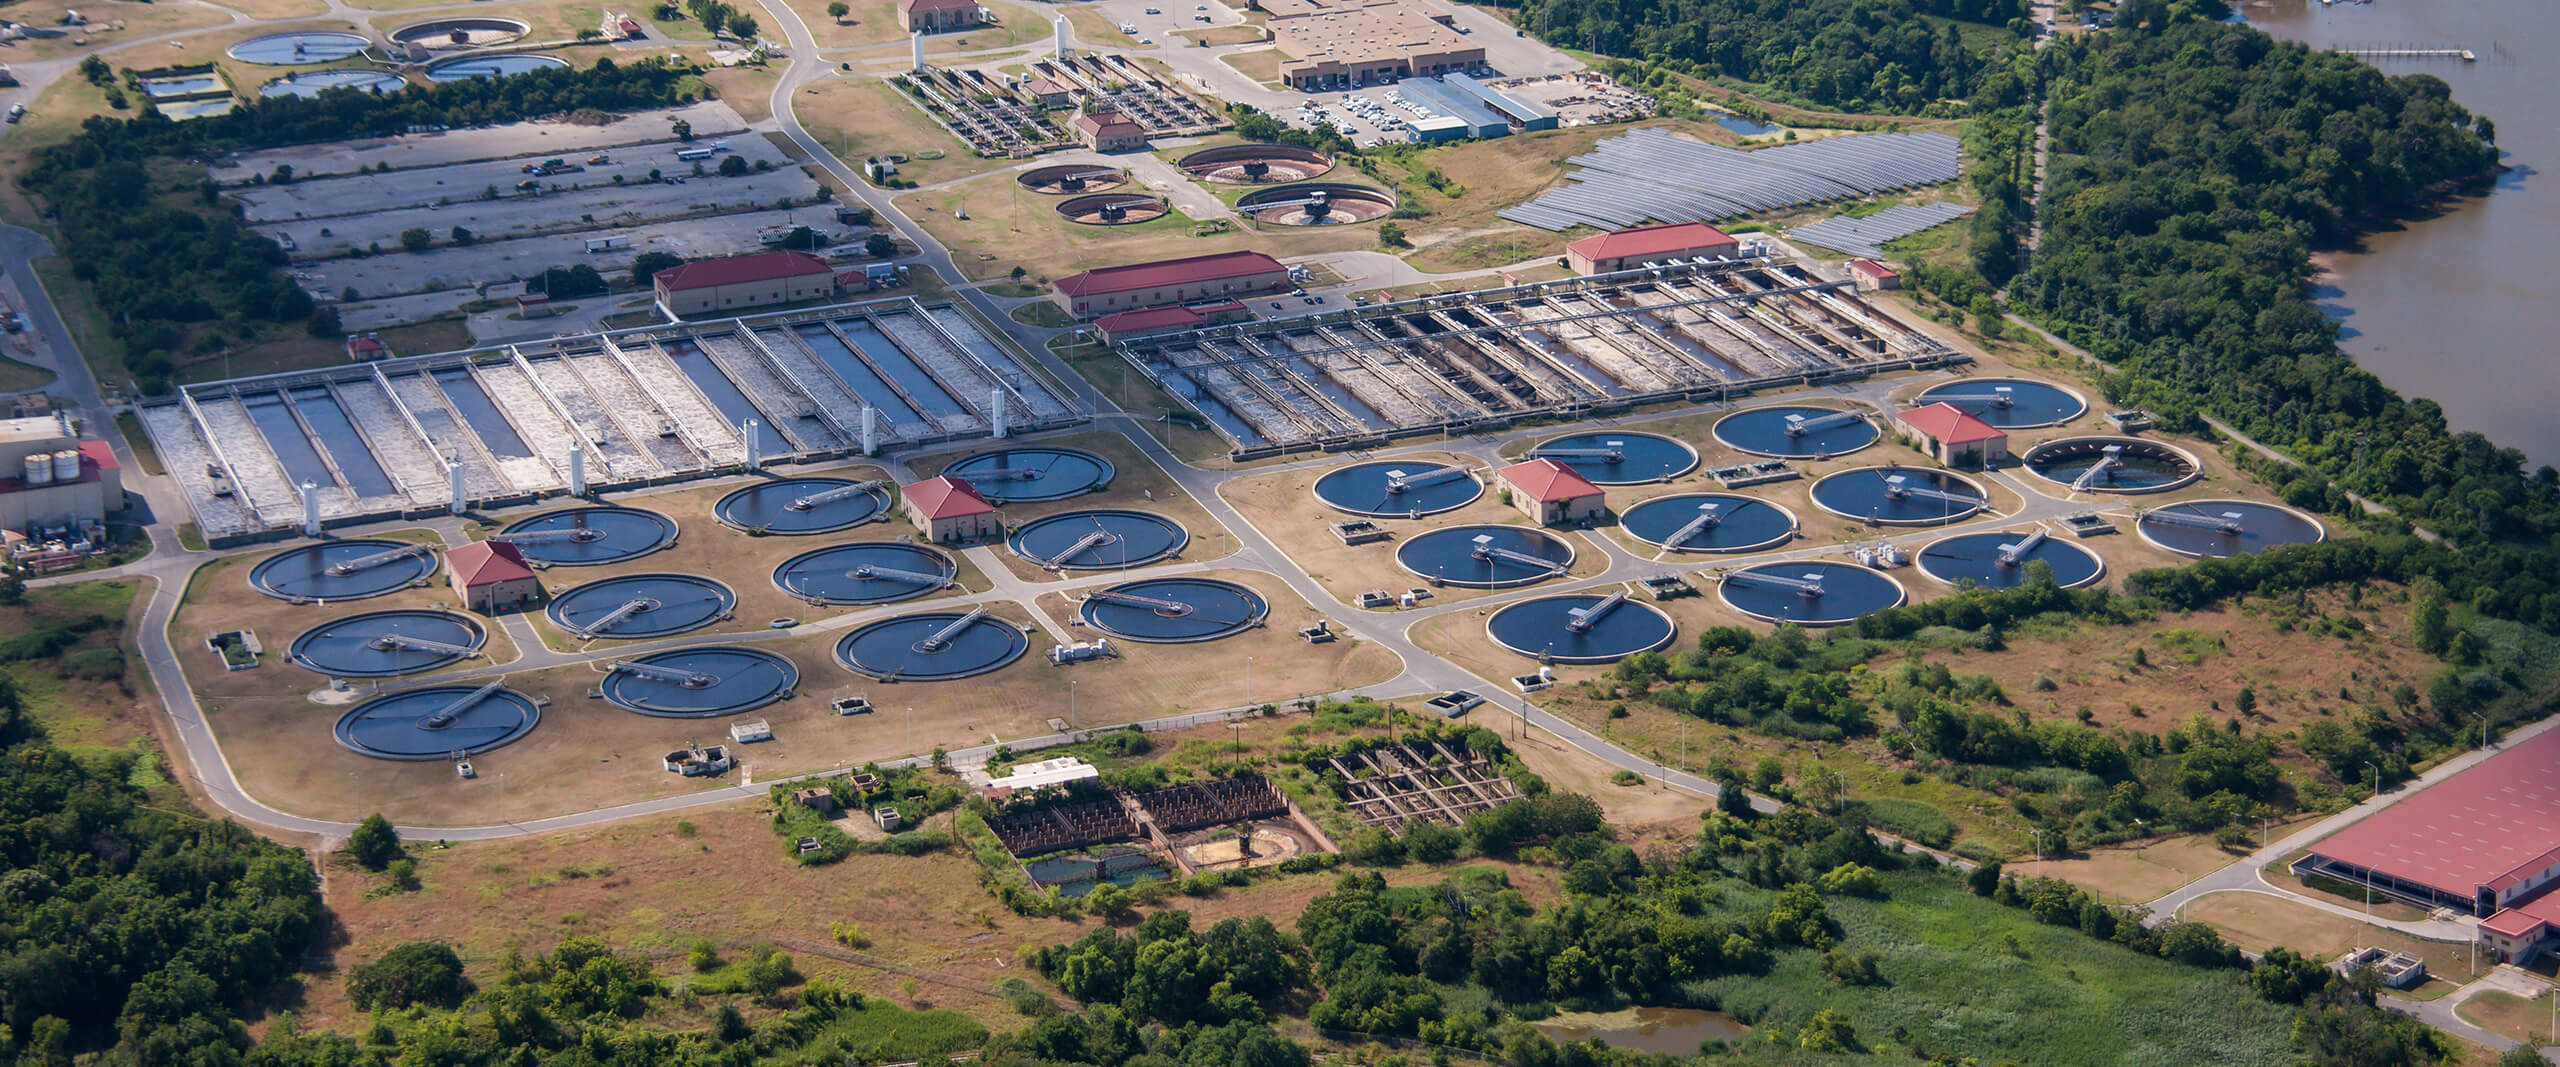 Aerial photo of a wastewater treatment plant